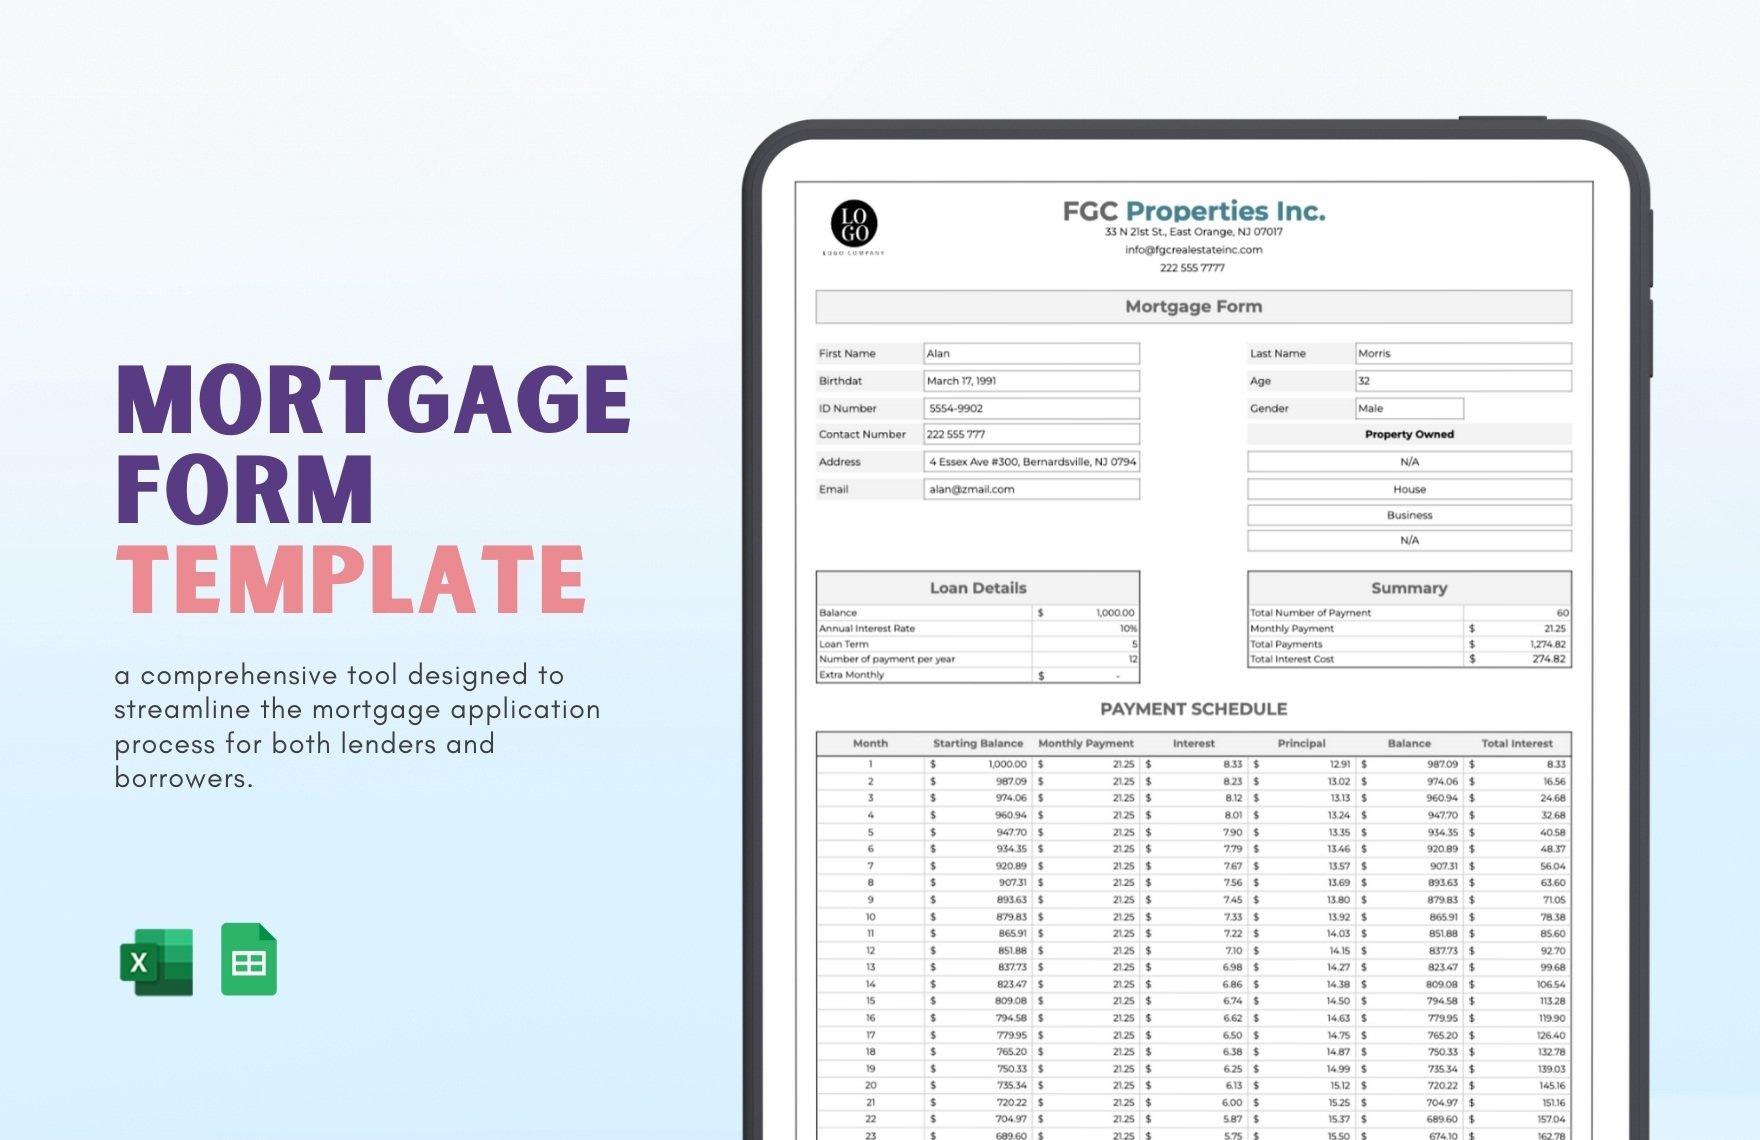 Free Mortgage Form Template